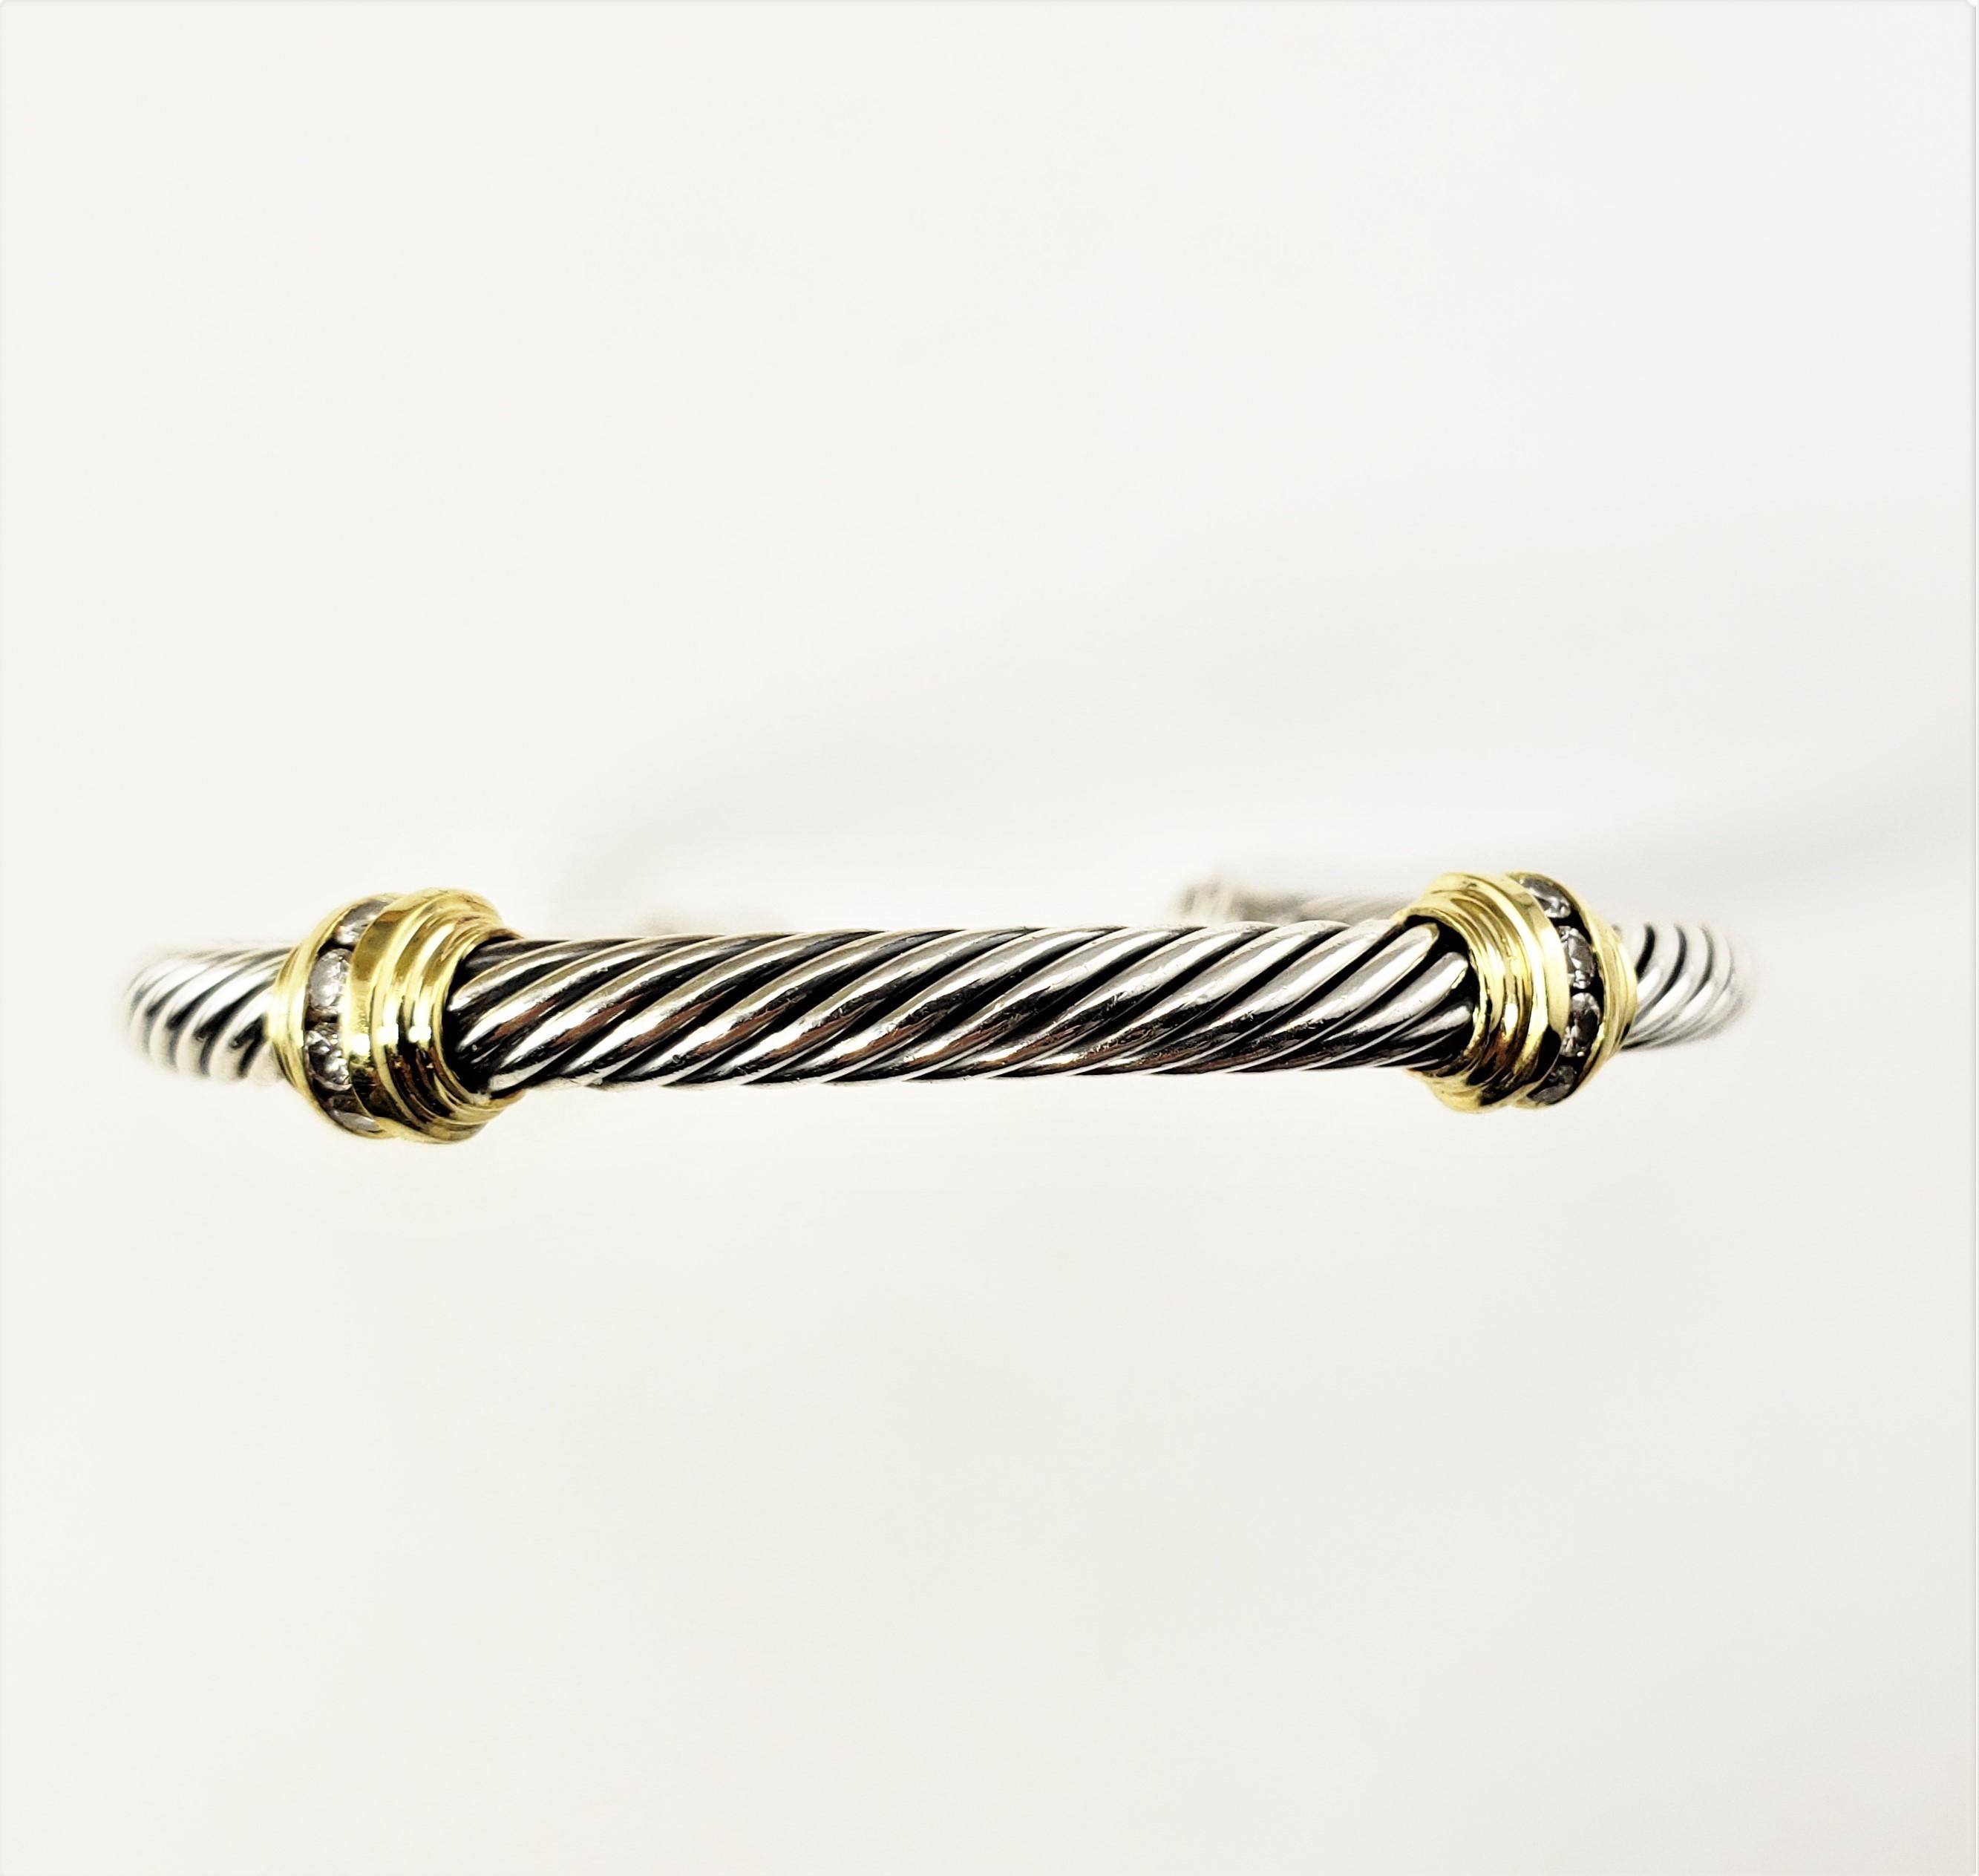 David Yurman Sterling Silver/18 Karat Yellow Gold and Diamond Cable Cuff Bracelet-

This lovely David Yurman cuff bracelet features eight round brilliant cut diamonds set in classic sterling silver and 18K yellow gold.  Width:  5 mm.

Approximate